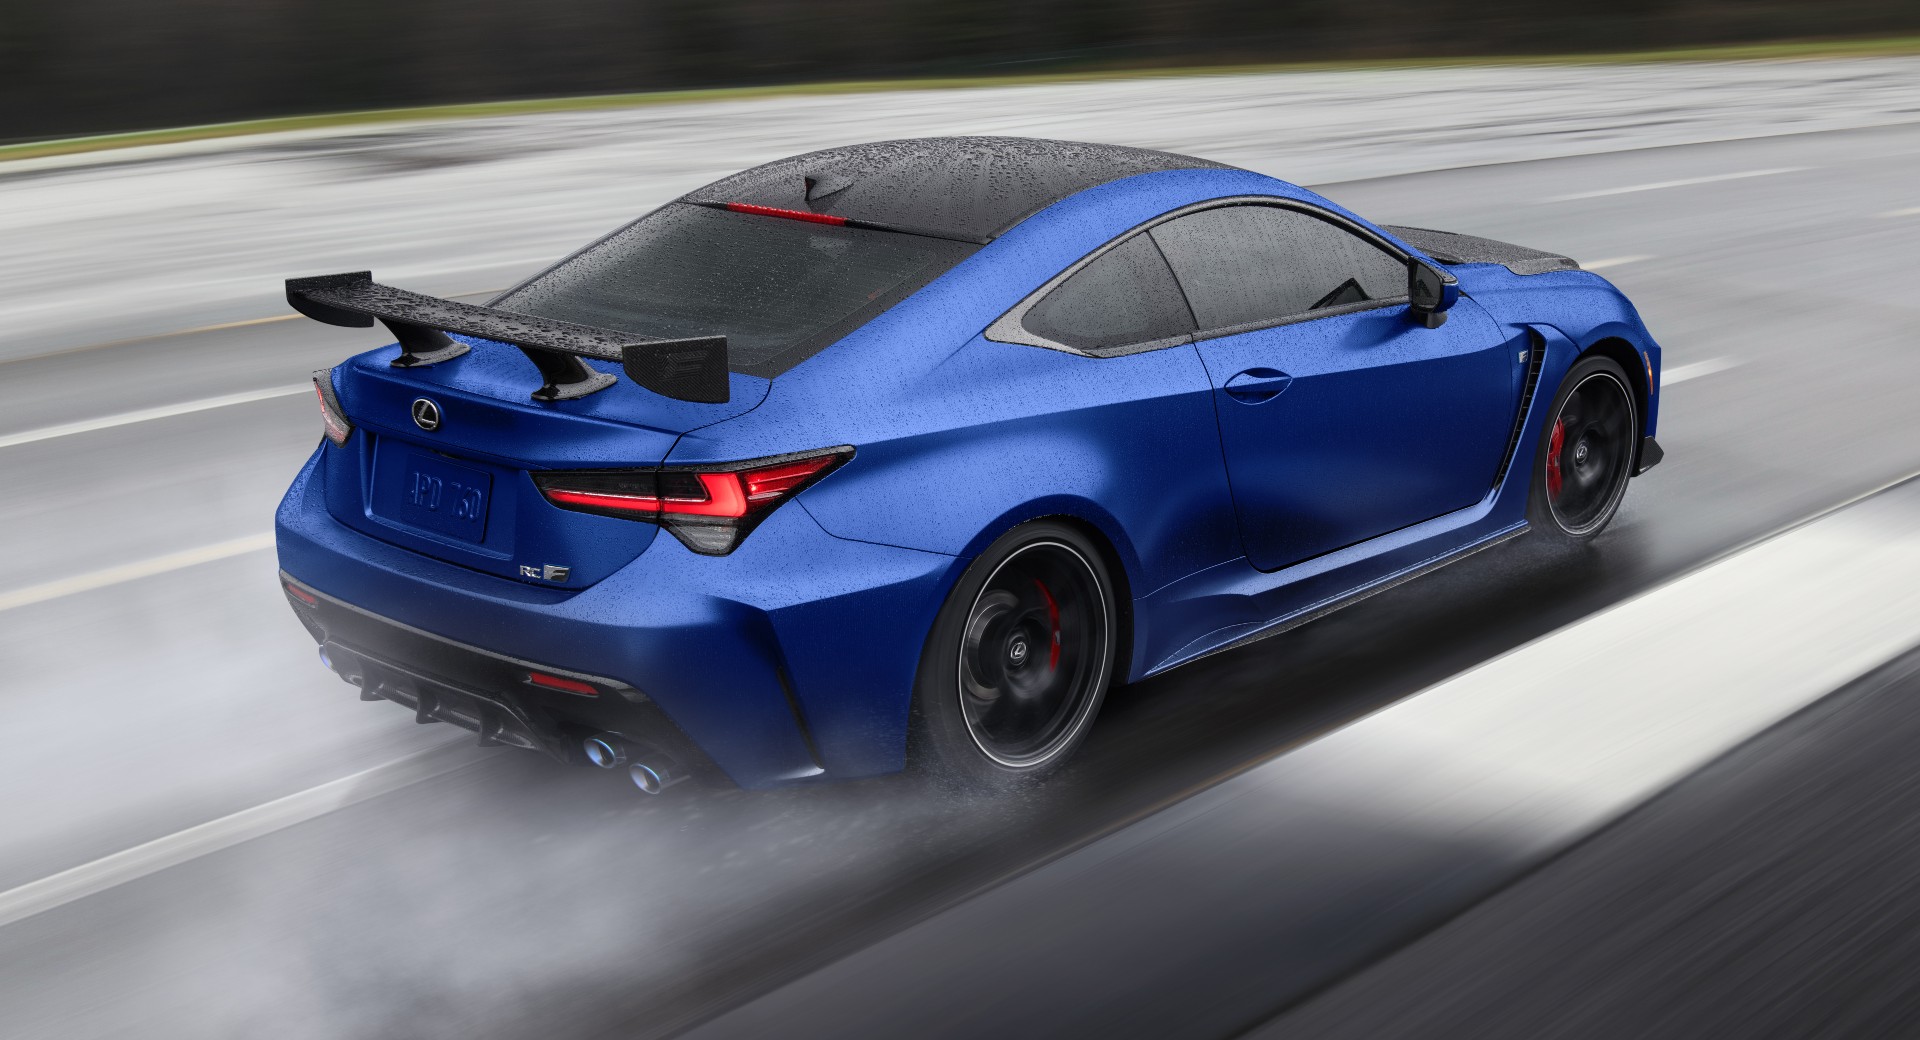 2022 Lexus RC F And RC F Fuji Speedway Edition Revealed For The US Market |  Carscoops